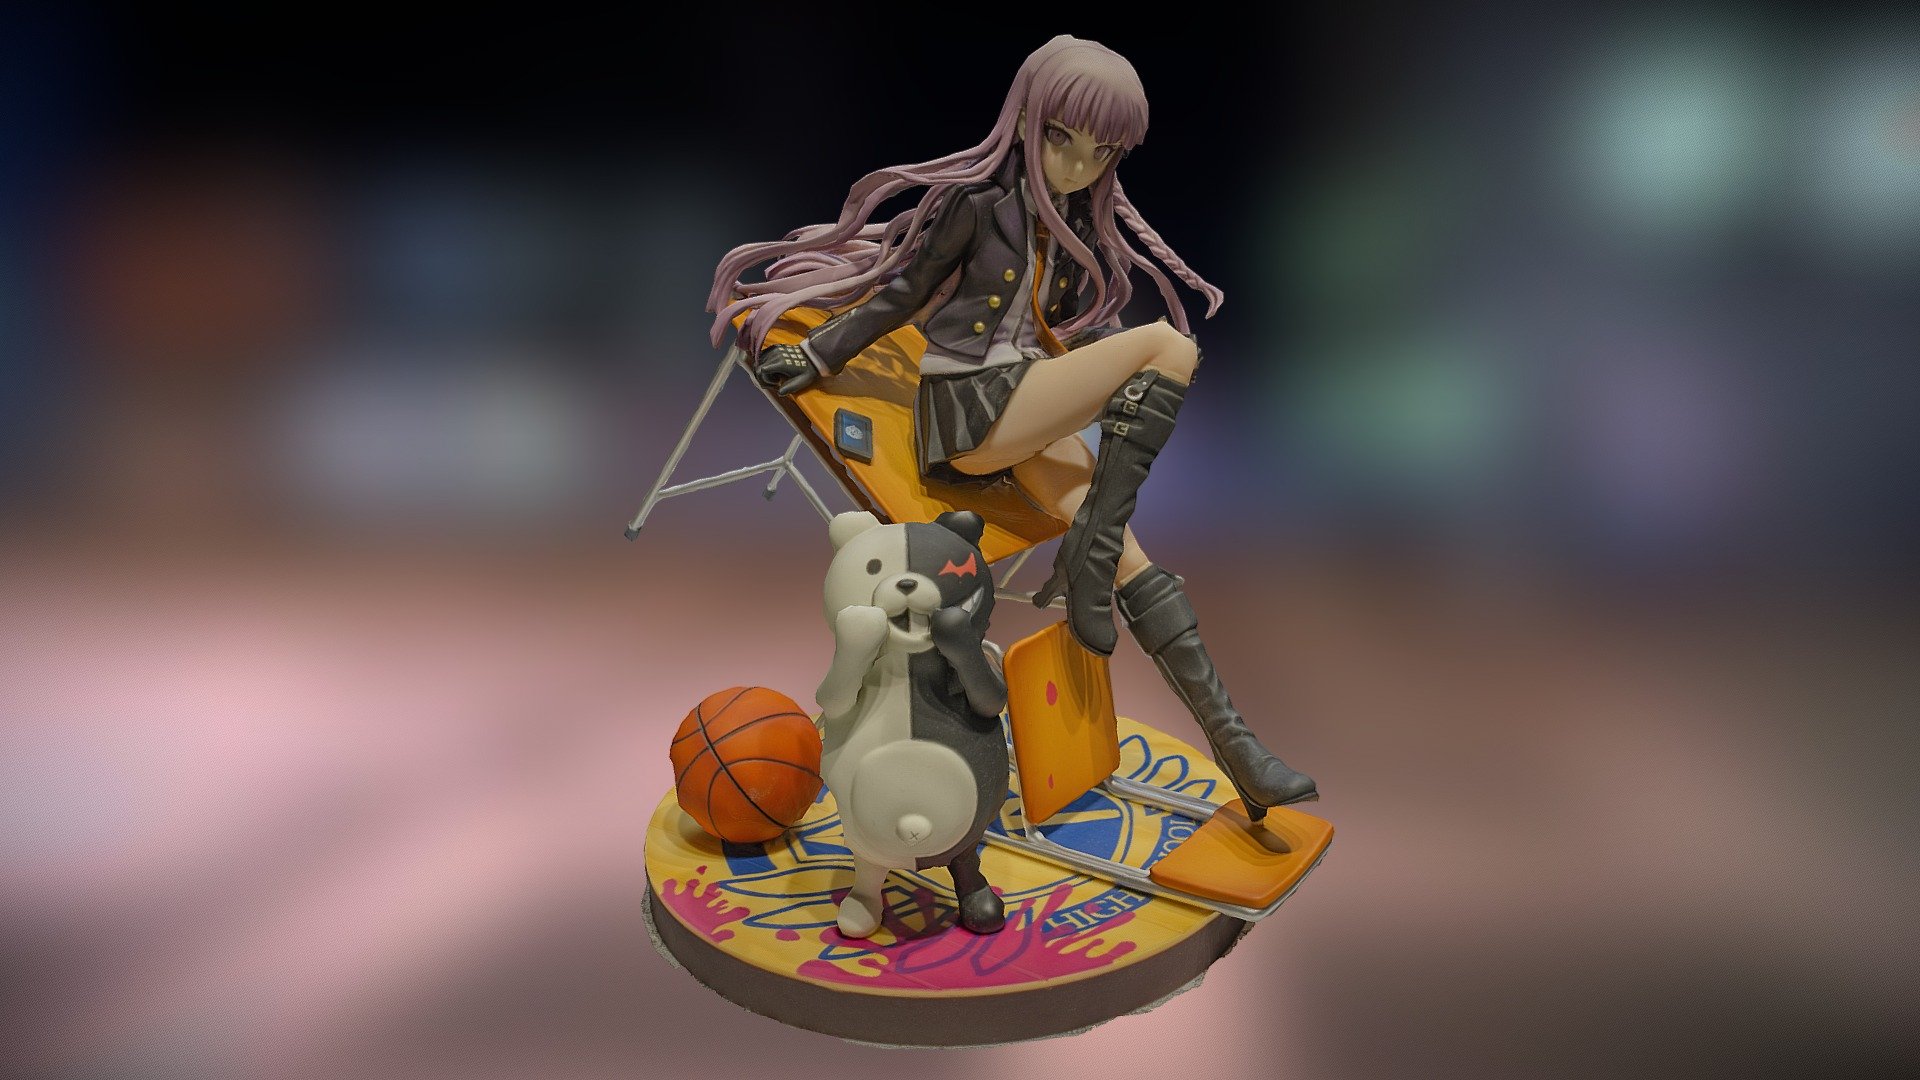 This is a photogrammetric scan of a figure made from 342 pictures.
The character is Kyouko Kirigiri from the video game/anime Danrangonpa - Kyouko Kirigiri figure from Danganronpa - Download Free 3D model by Thimeo 3d model